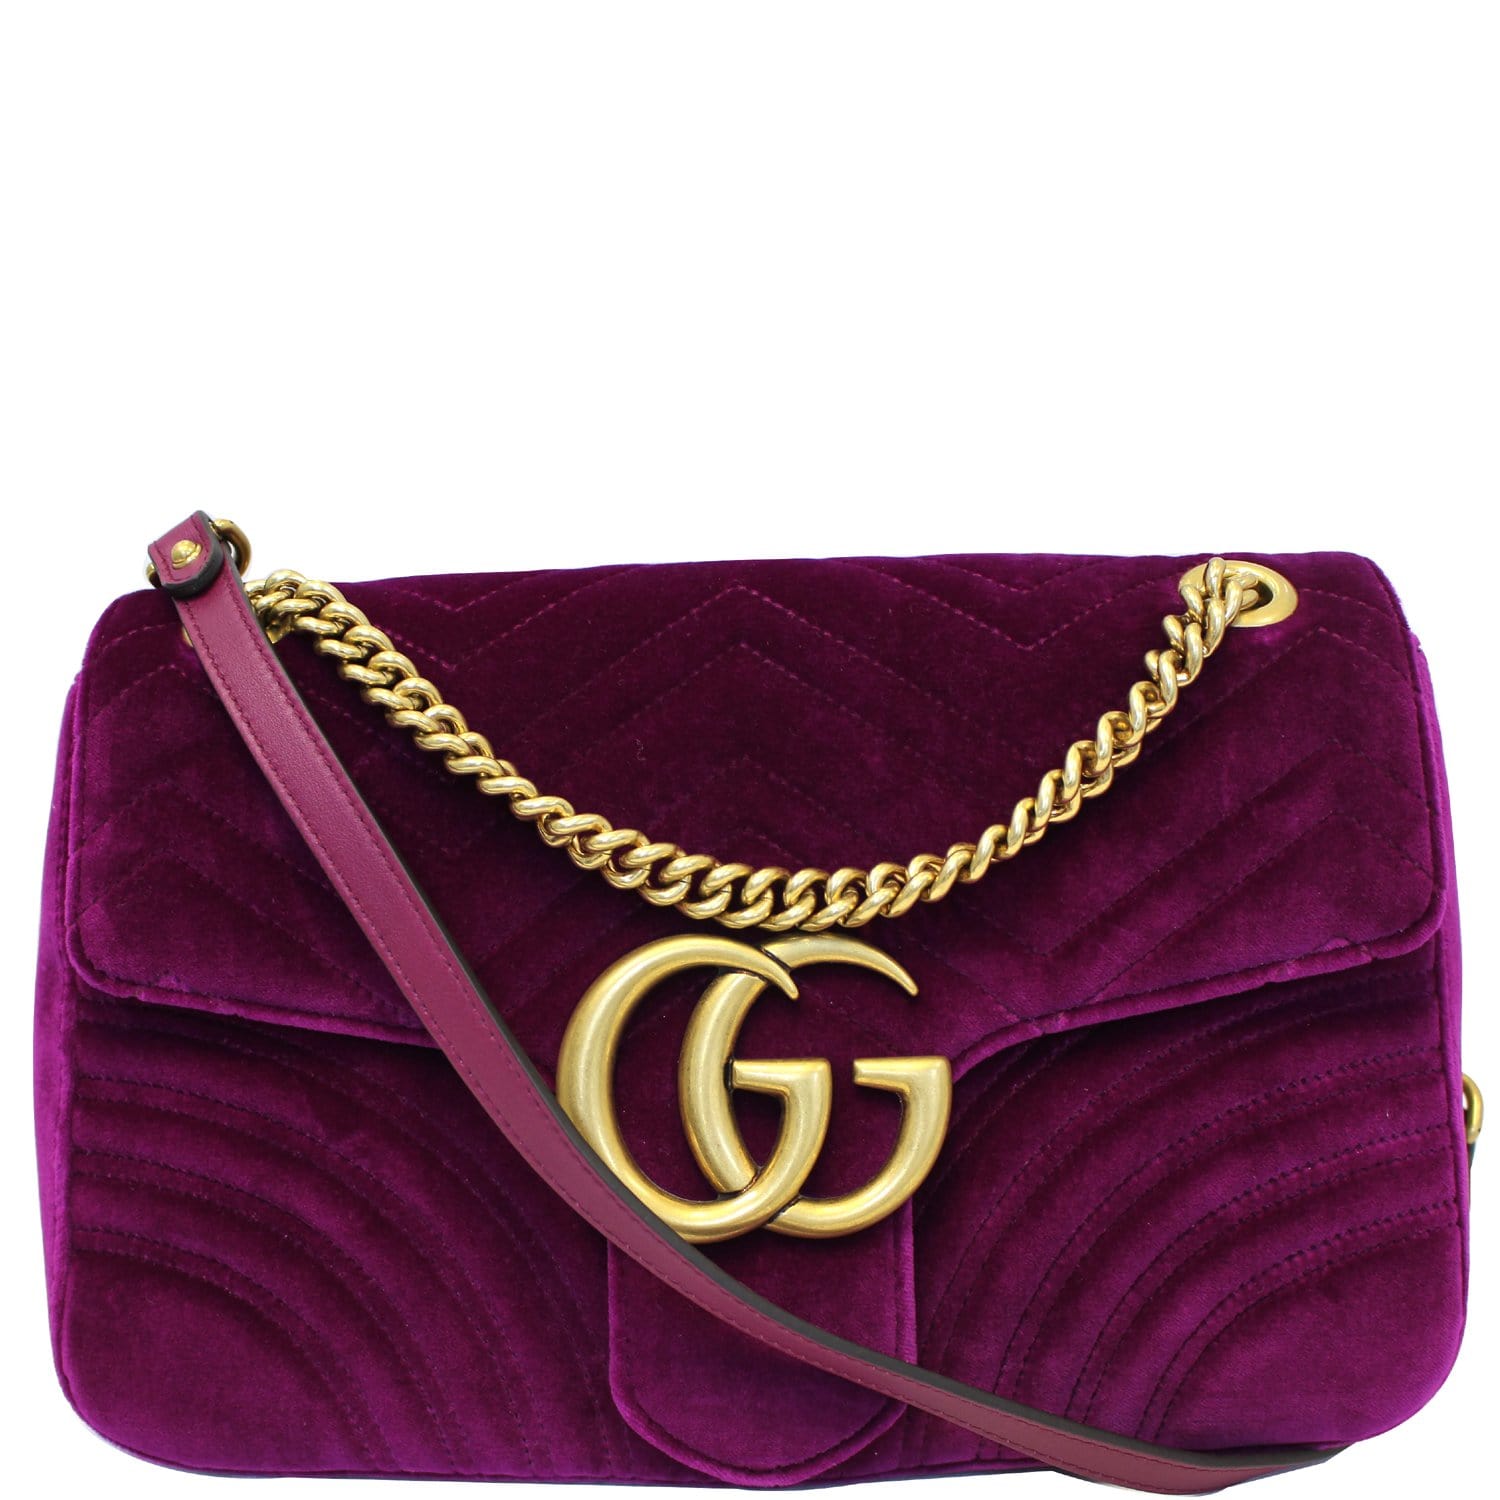 Why You Need to Buy the Gucci Velvet Marmont Bag